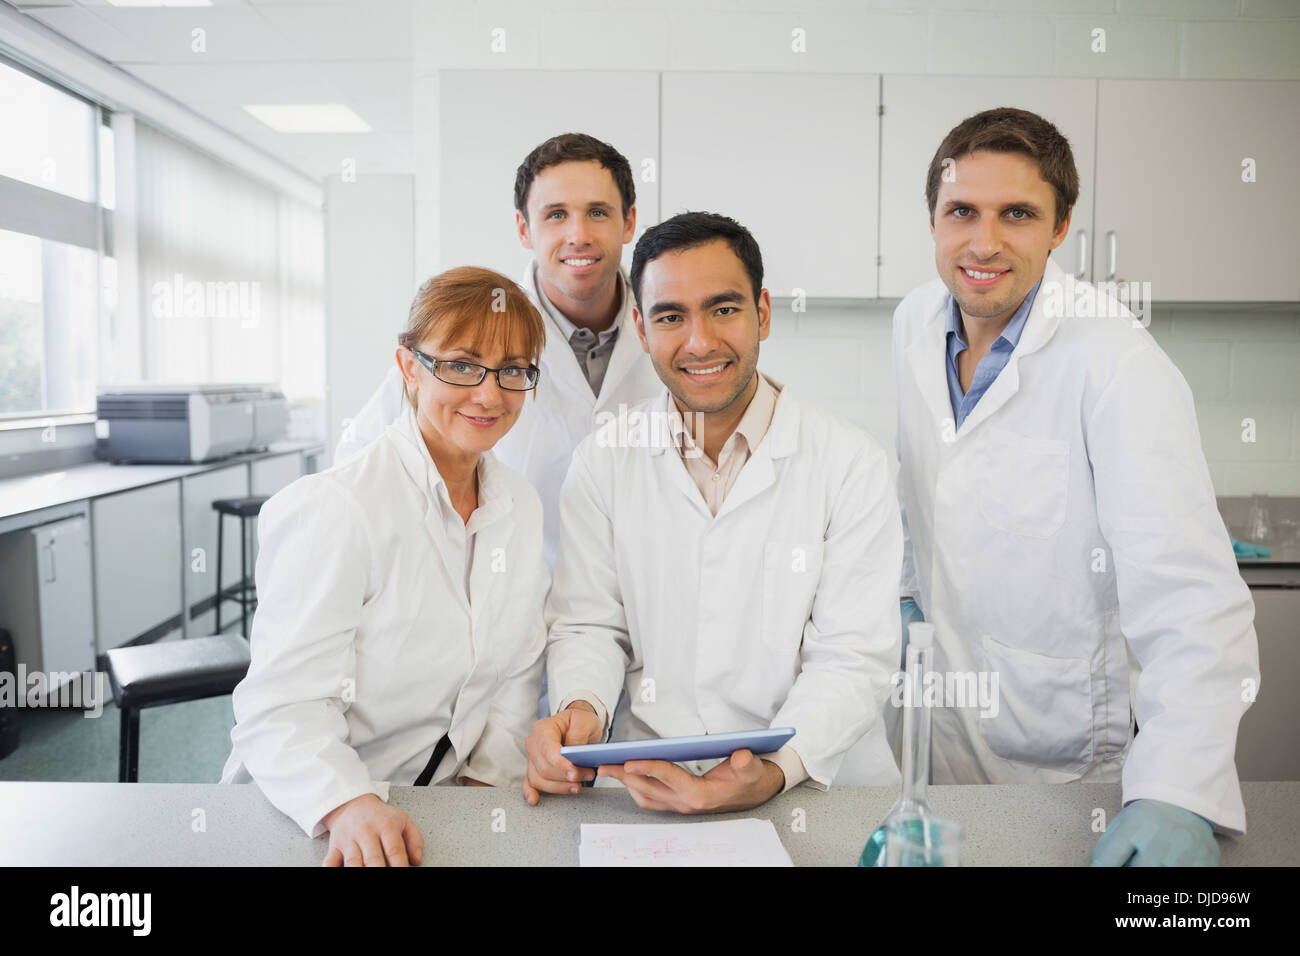 Some scientists standing behind a desk in the laboratory holding a tablet Stock Photo